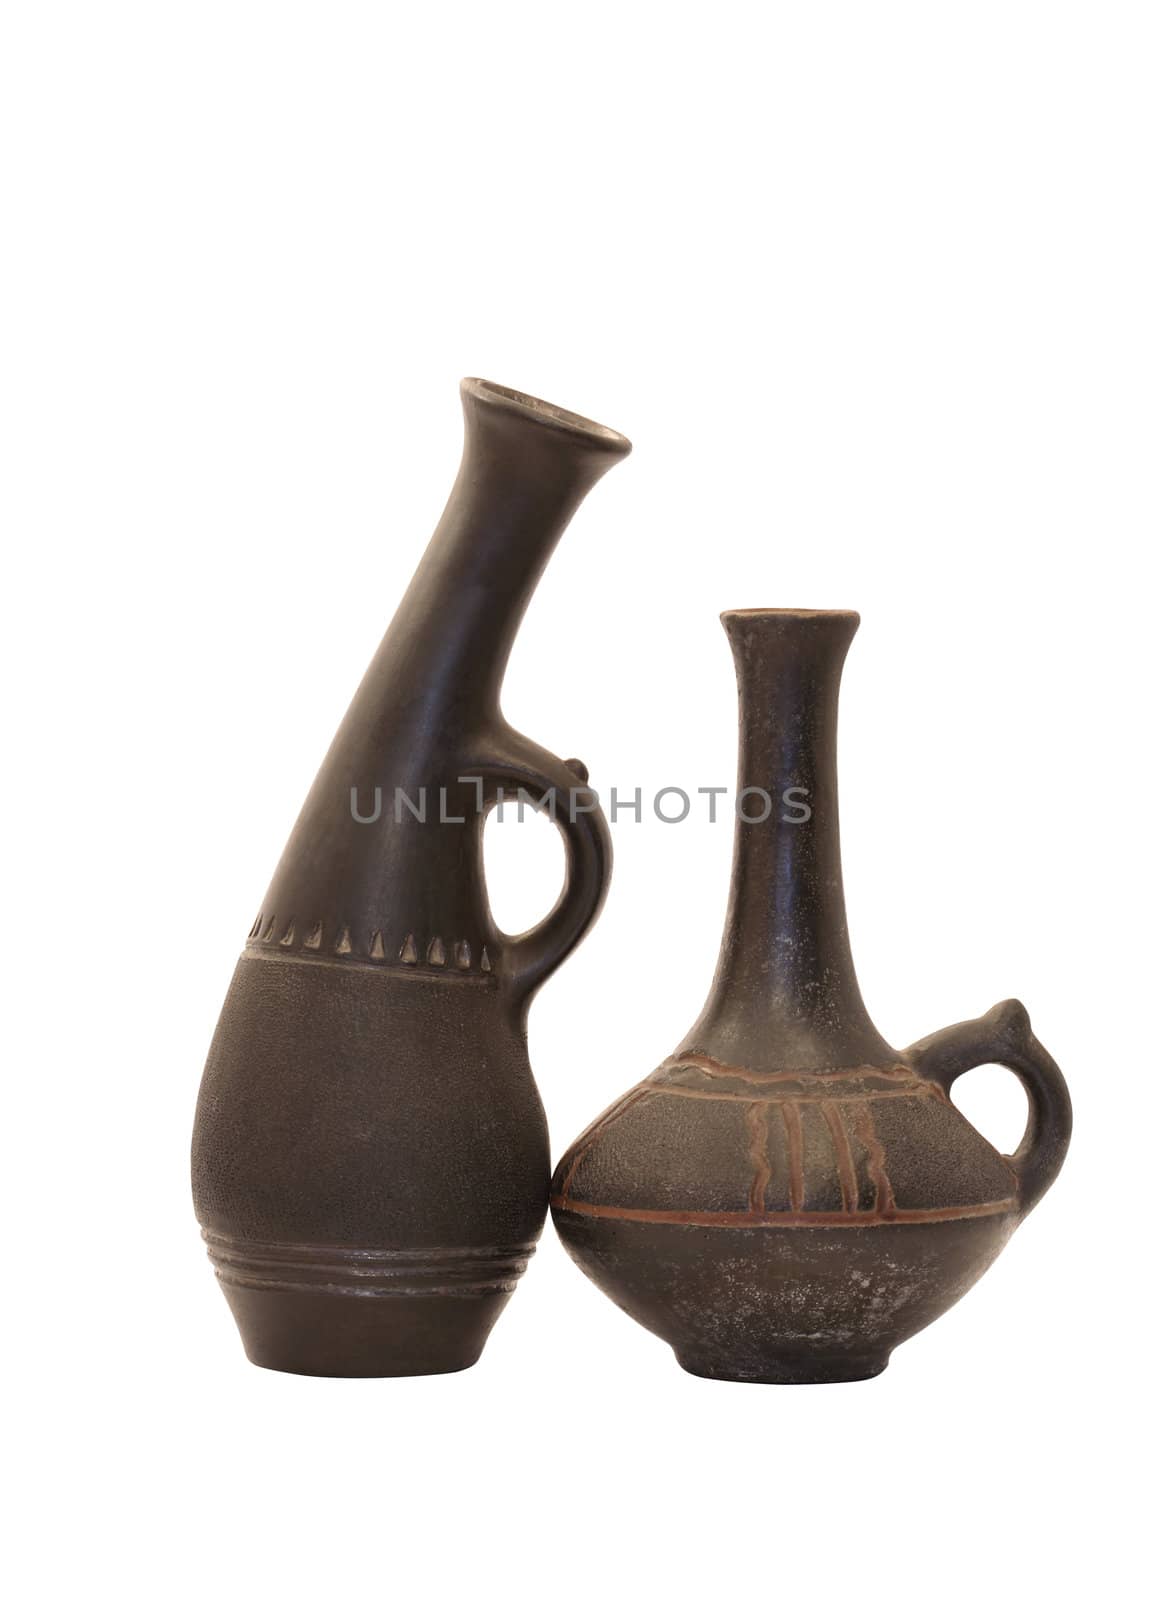 Two nice ancient ceramic vases isolated on white with clipping path